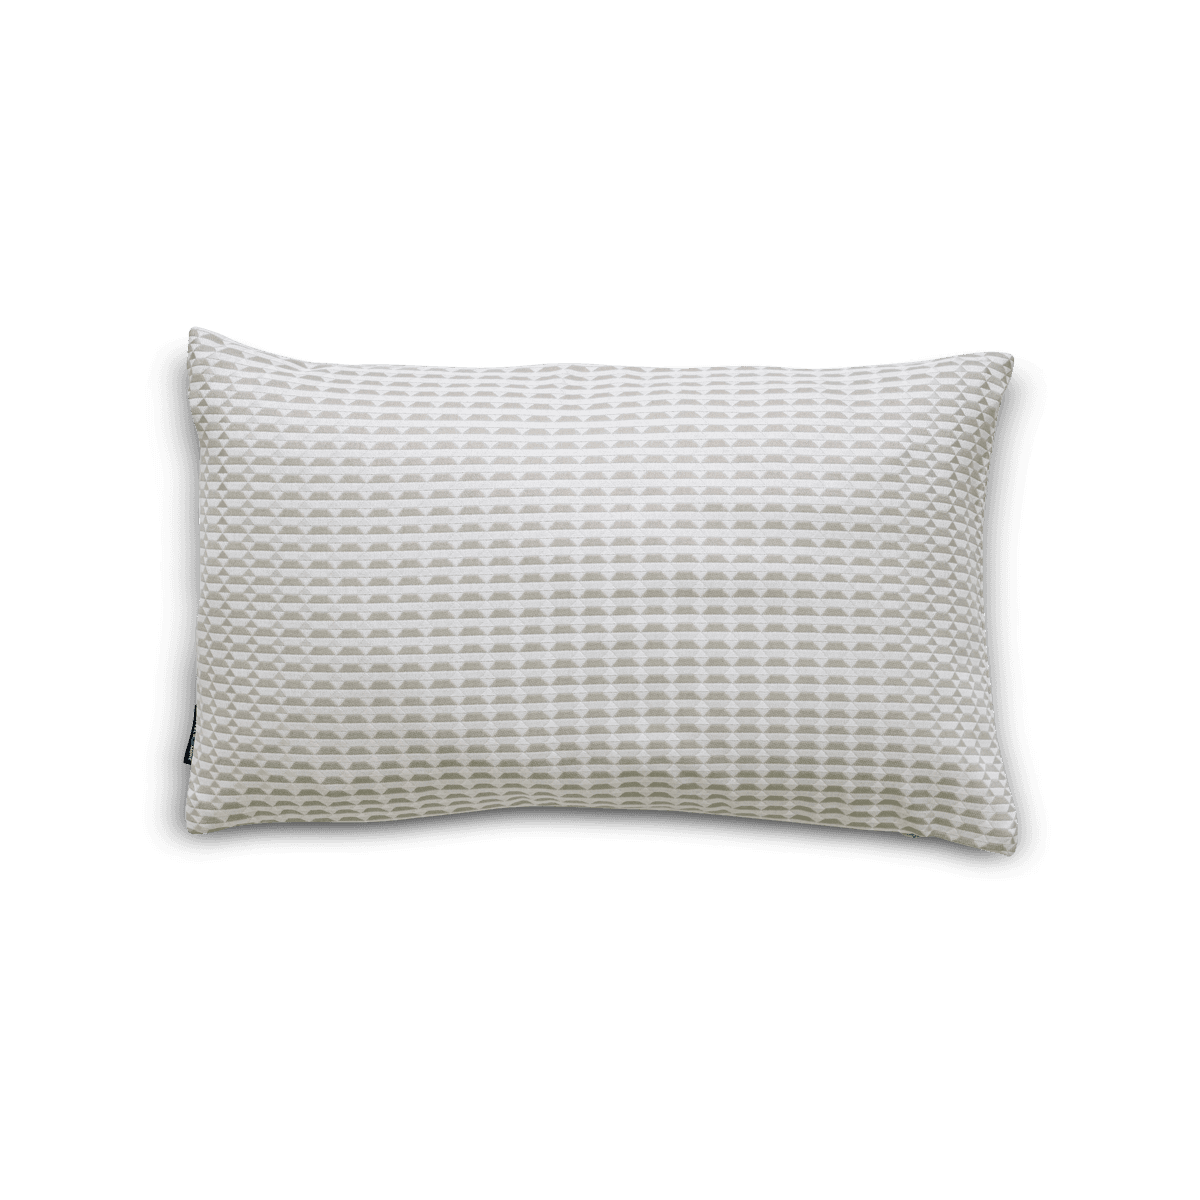 Cushion Paola Laurent II with Filler,Neutral White & Beige